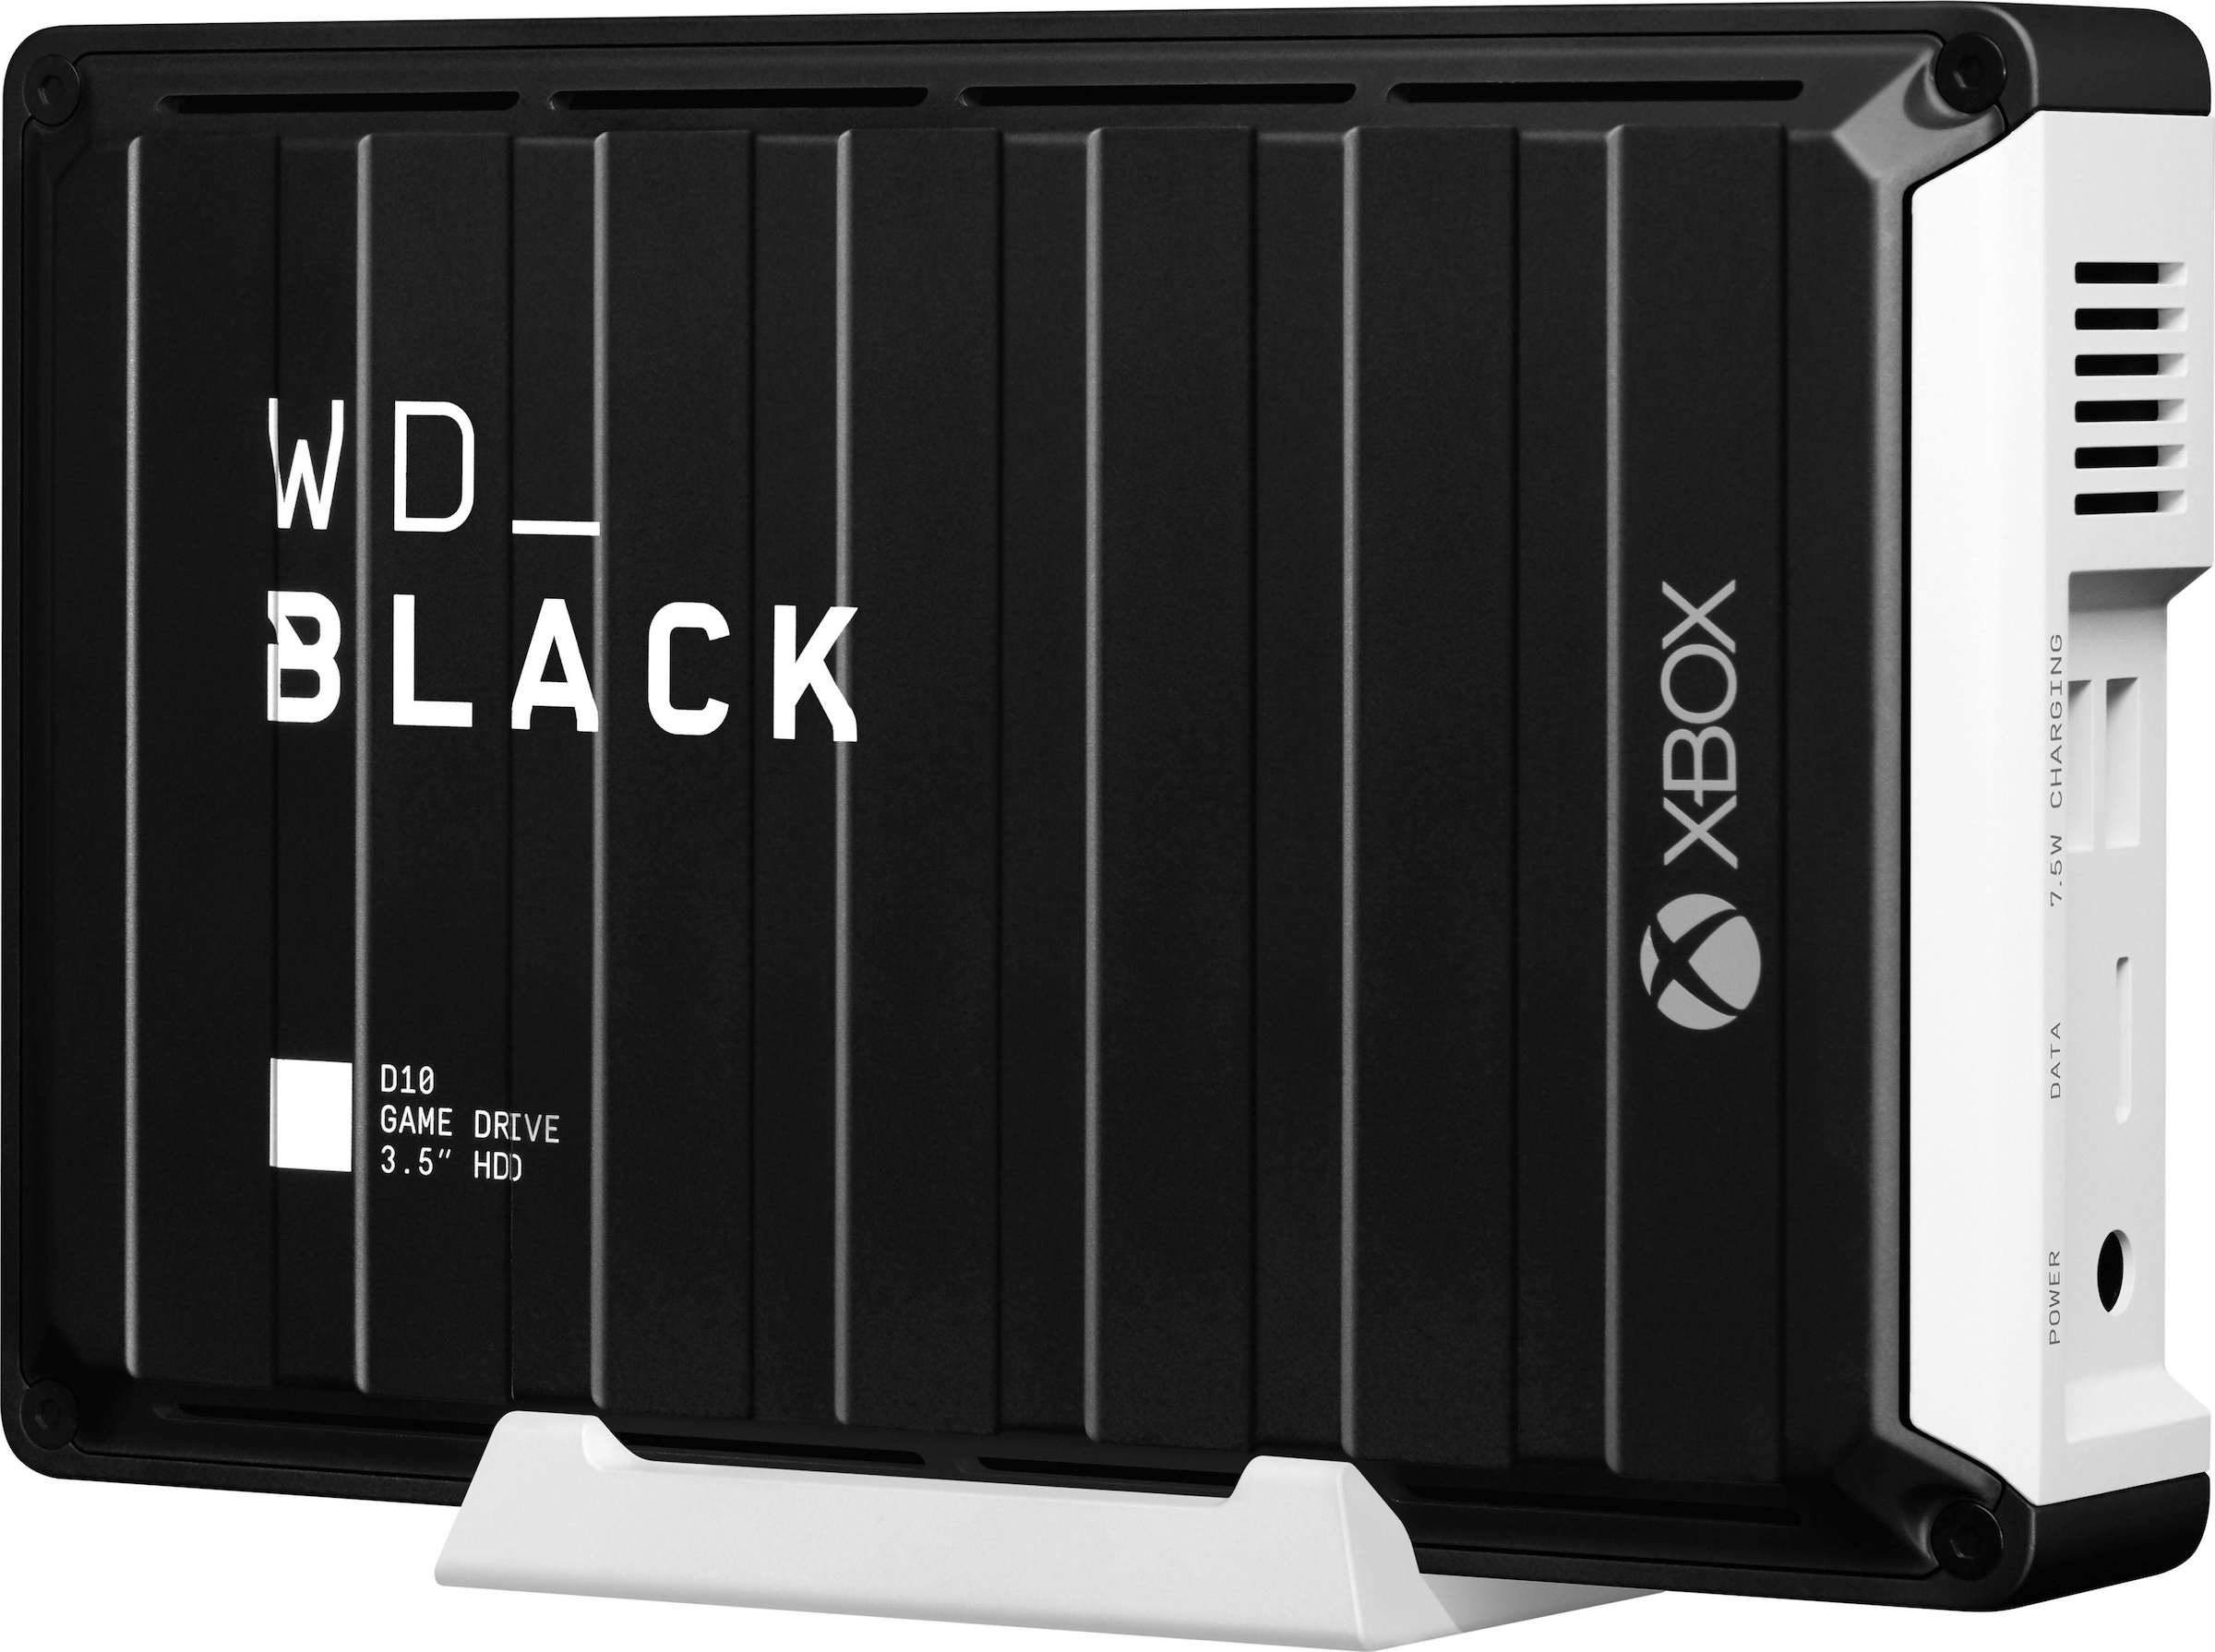 WD_Black externe Gaming-Festplatte »D10 Game Drive XBOX«, 3,5 Zoll, Anschluss USB 3.2